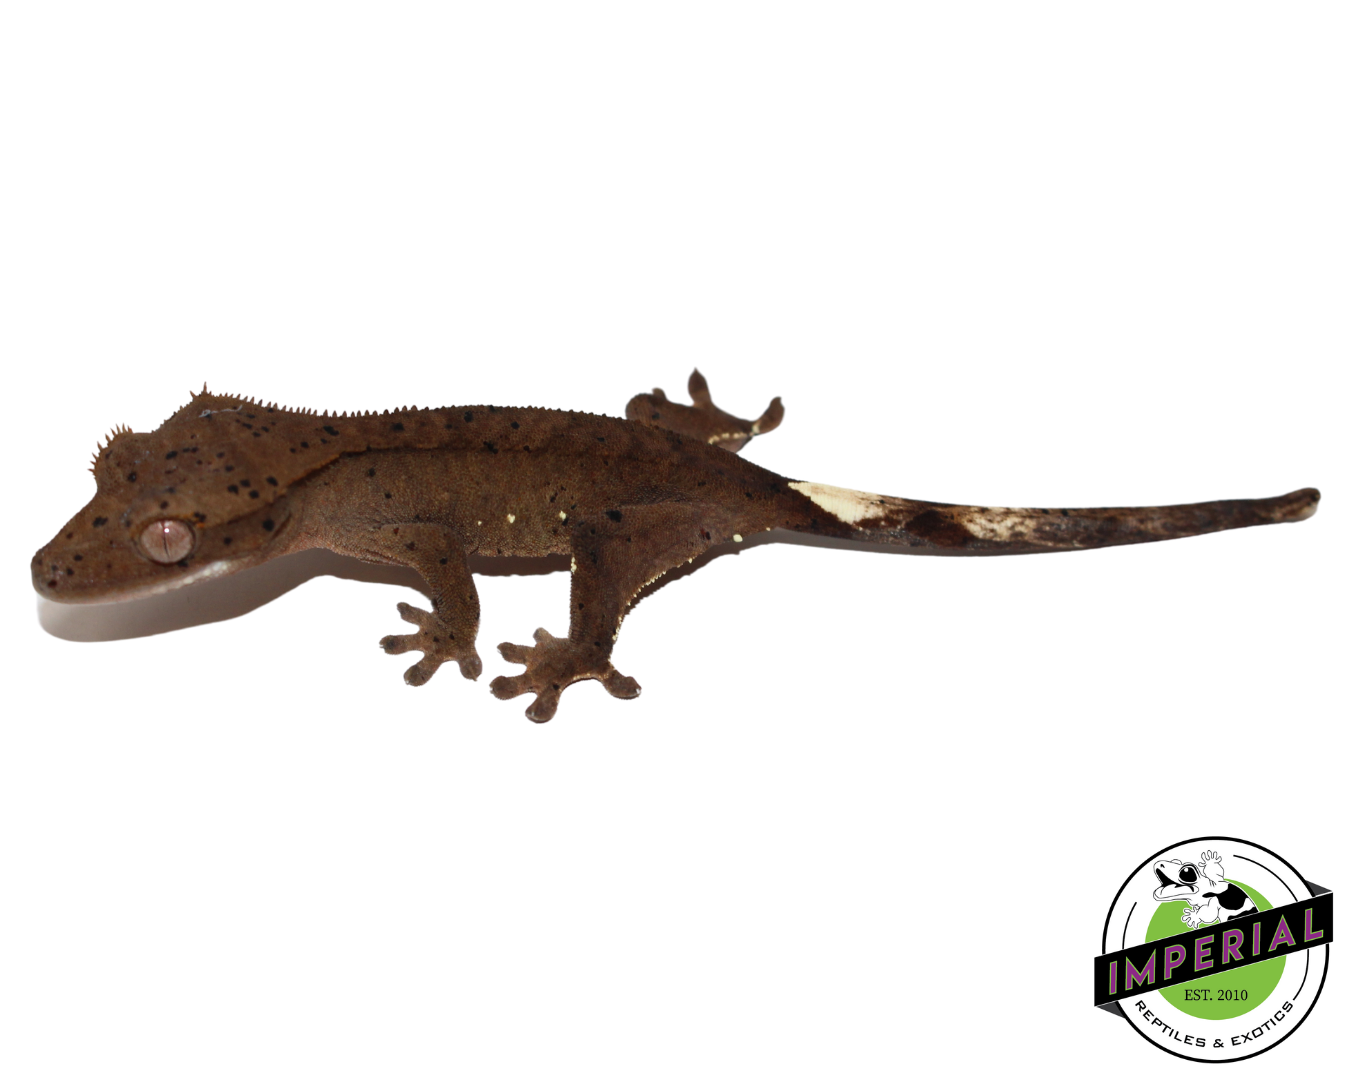 Super Dalmatian Crested Gecko for sale, reptiles for sale, buy reptiles online